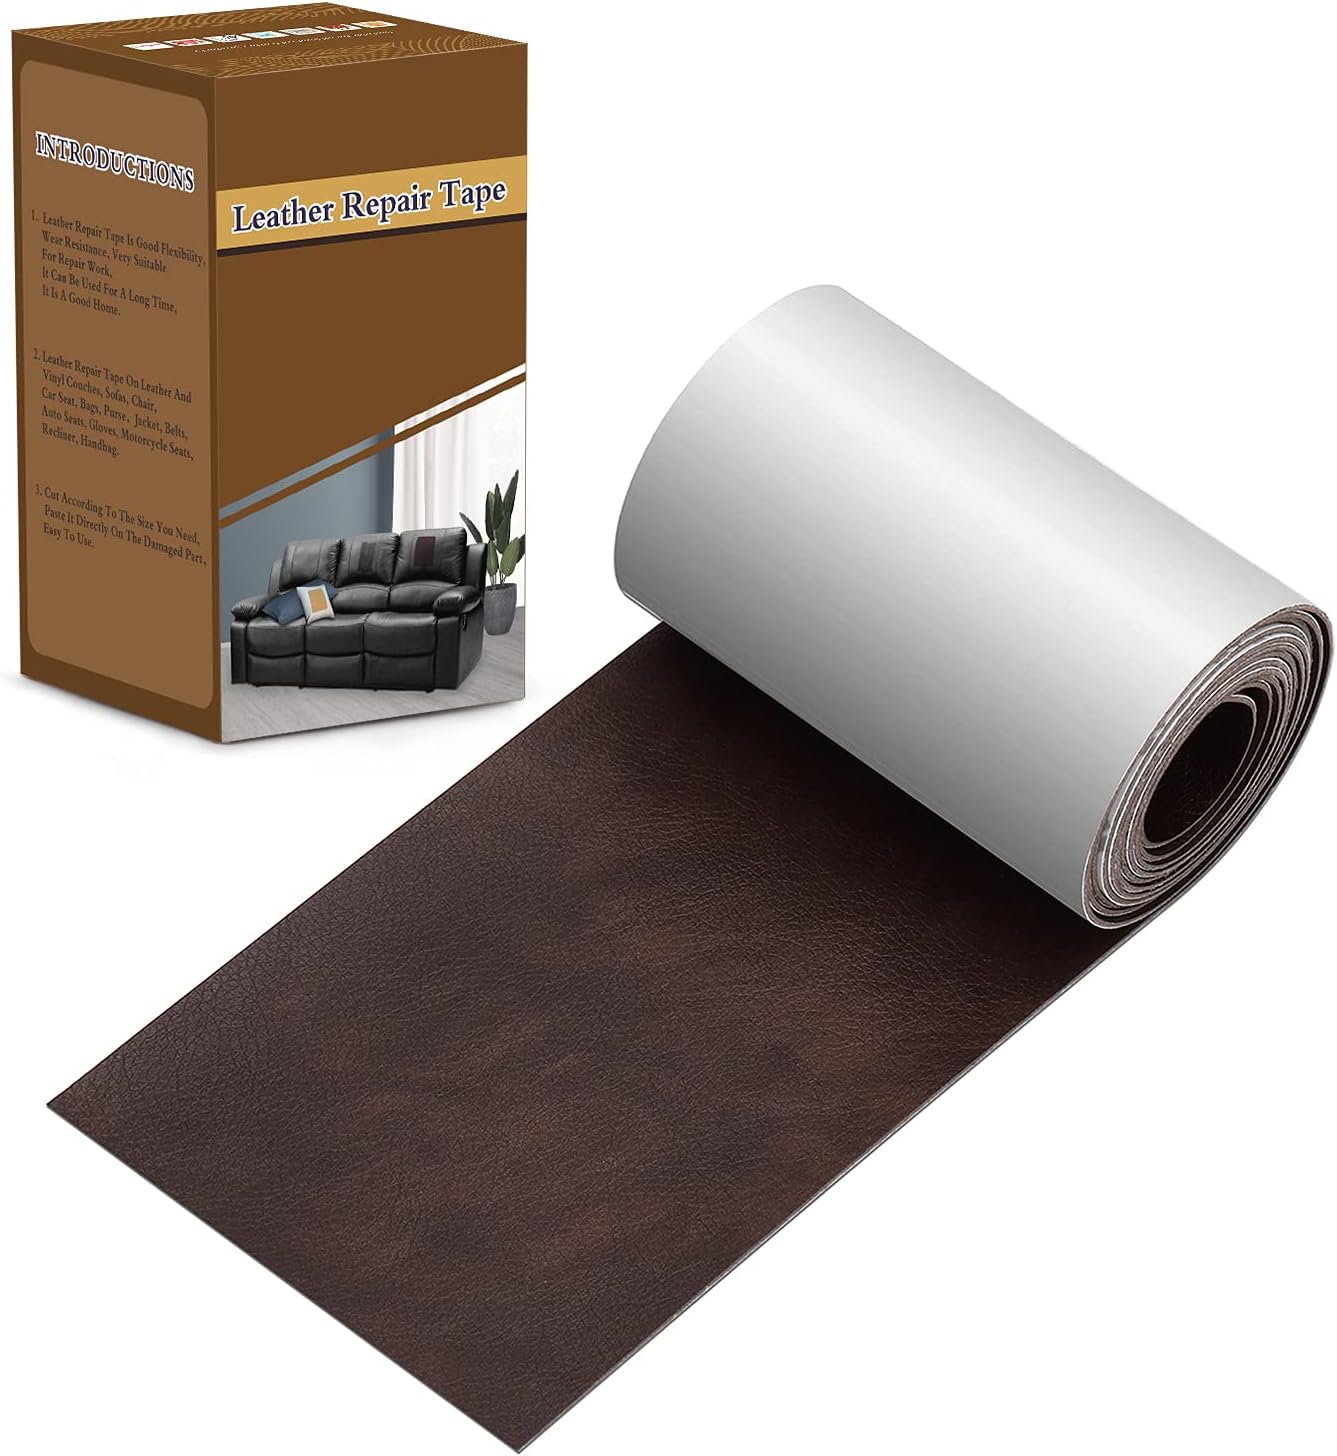 ONine Leather Tape 3X60 Inch Self-Adhesive Leather [...]